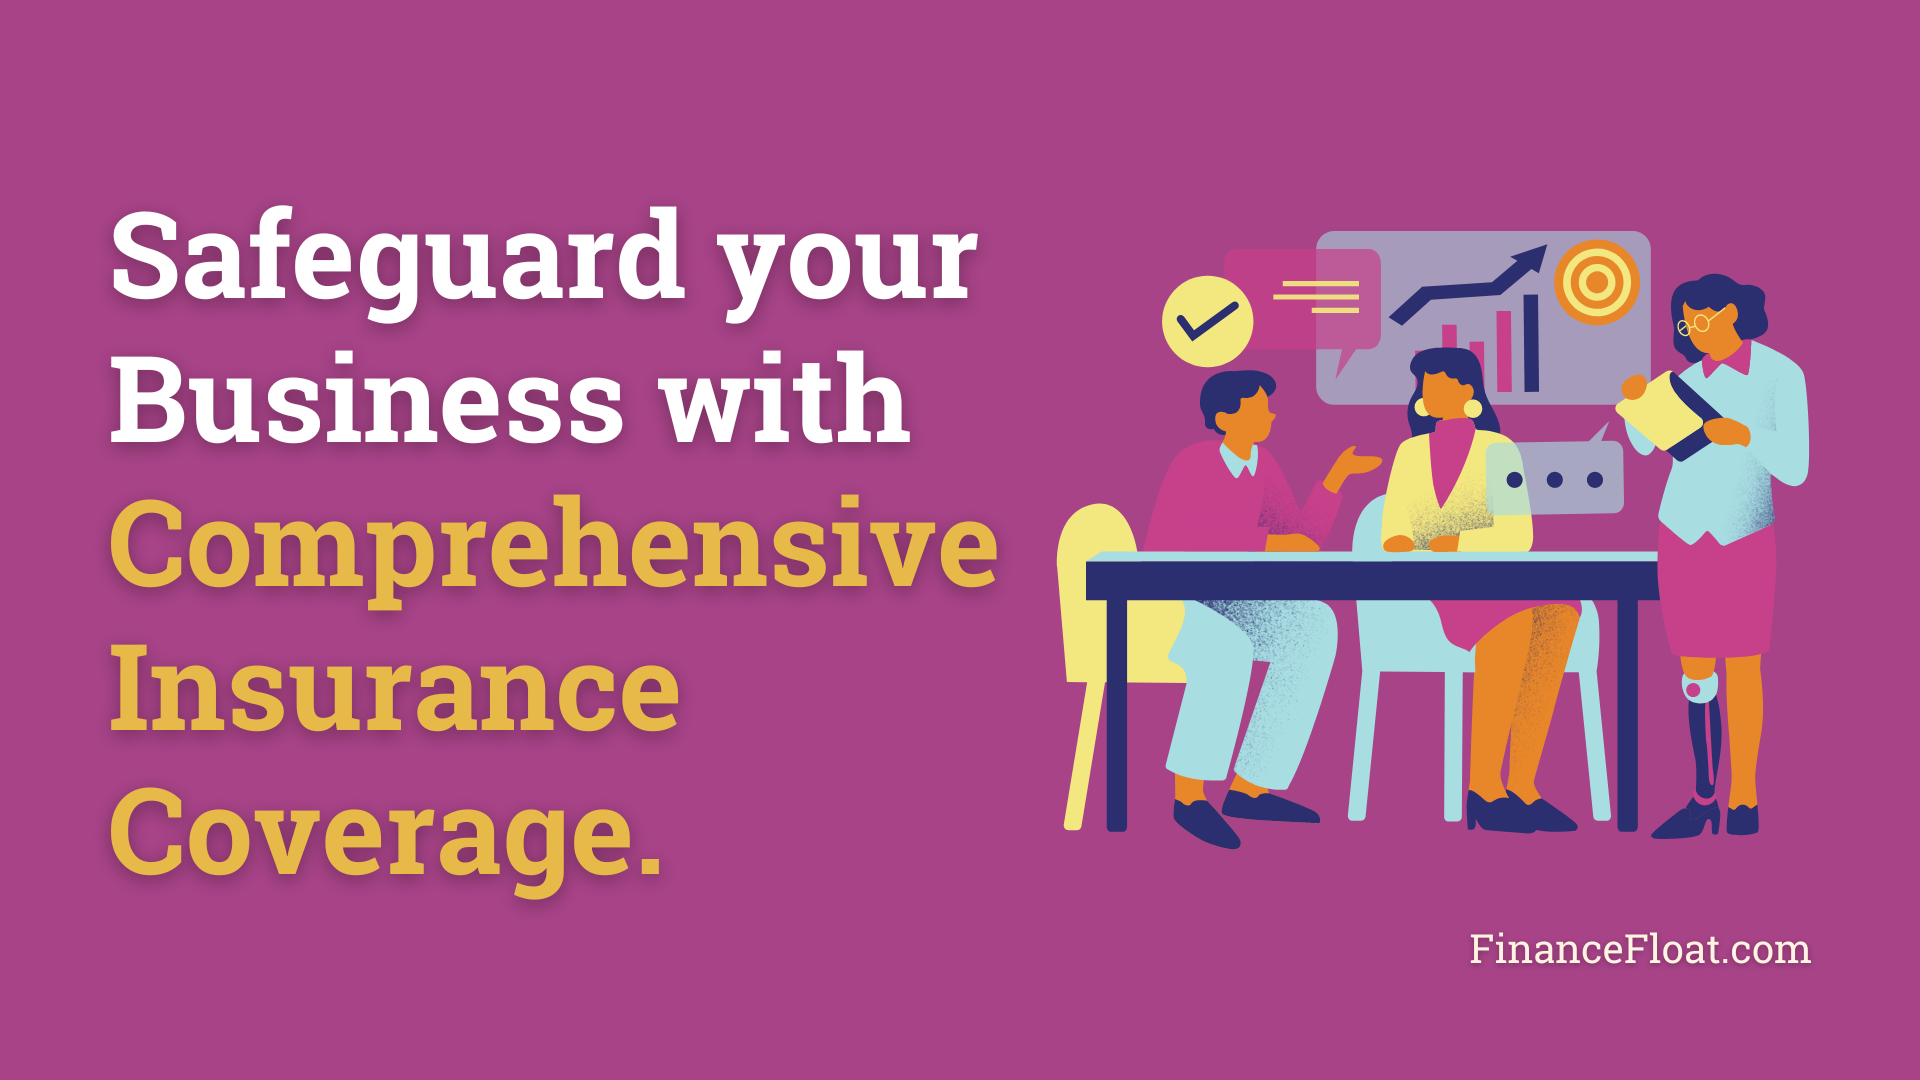 Safeguard your Business with Comprehensive Insurance Coverage.